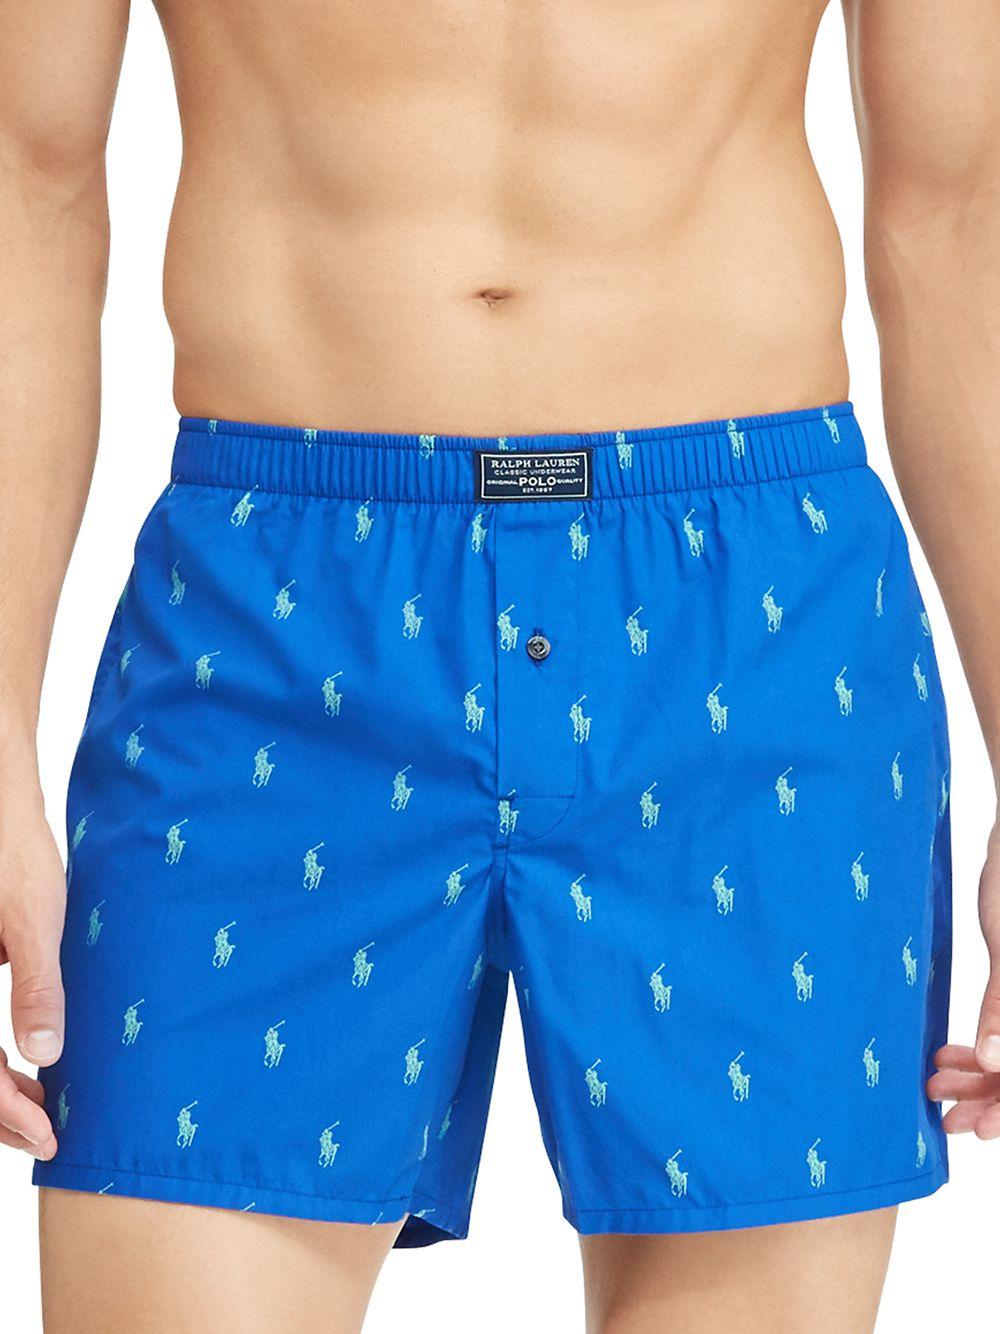 Polo Ralph Lauren Printed Cotton Boxer Shorts in Blue for Men - Lyst